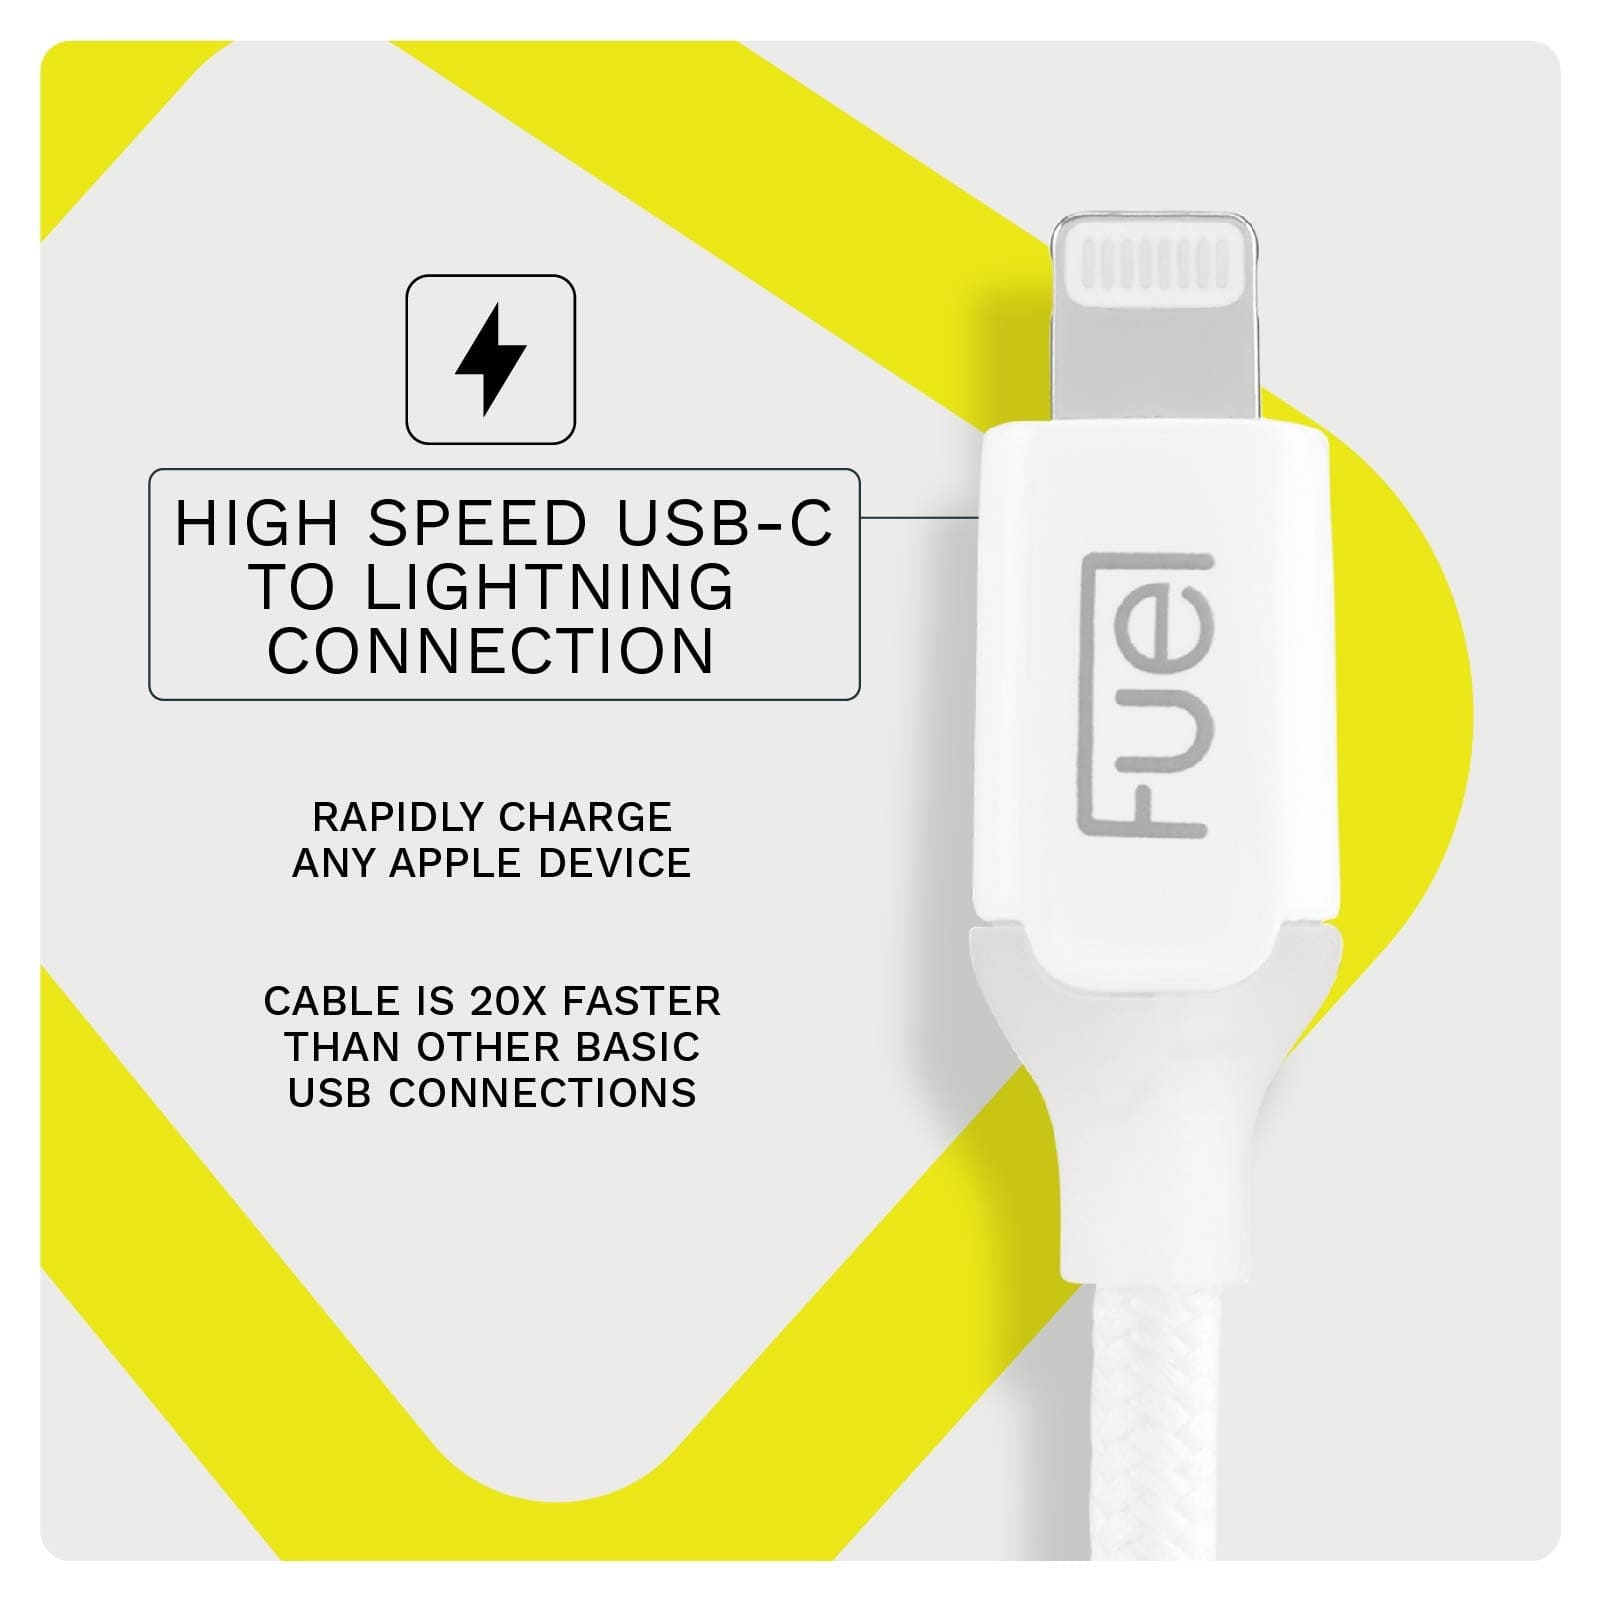 HIGH SPEED USB-C TO LIGHTNING CONNECTION. RAPIDLY CHARGE ANY APPLE DEVICE. ABLE IS 20X FASTER THAN OTHER BASIC USB CONNECTIONS. COLOR::WHITE